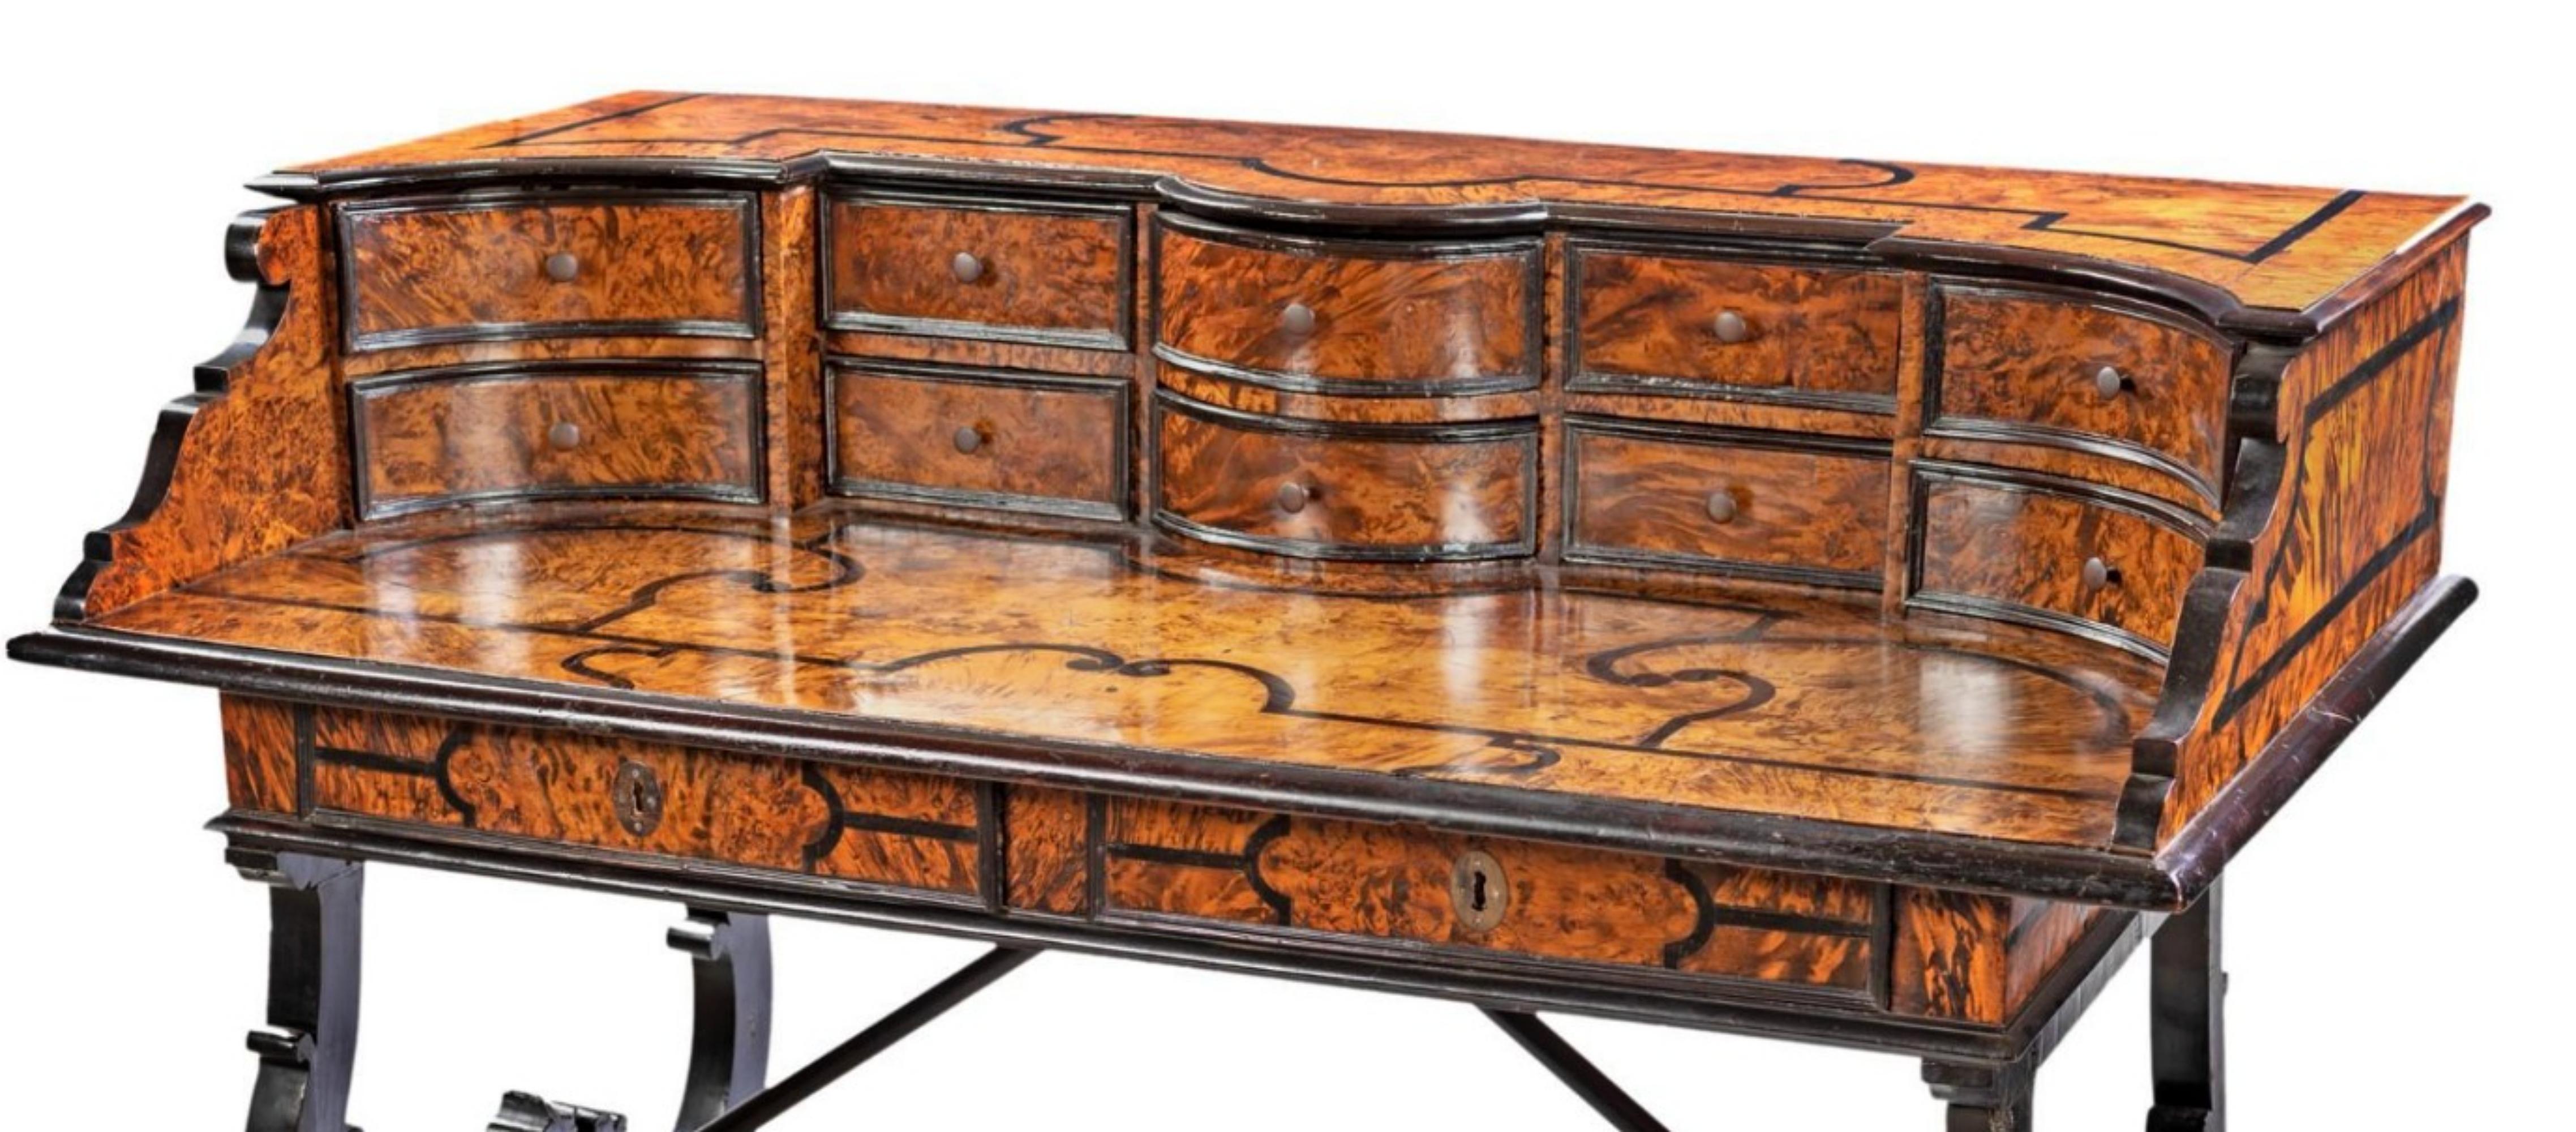 Italian Desk Veneered in Walnut Briar, Lombardy 17th century
with ebonized profiles and large contrasting threads arranged to create shaped reserves; floor surmounted by a riser with a mixtilinear facade marked by ten drawers; two drawers in line